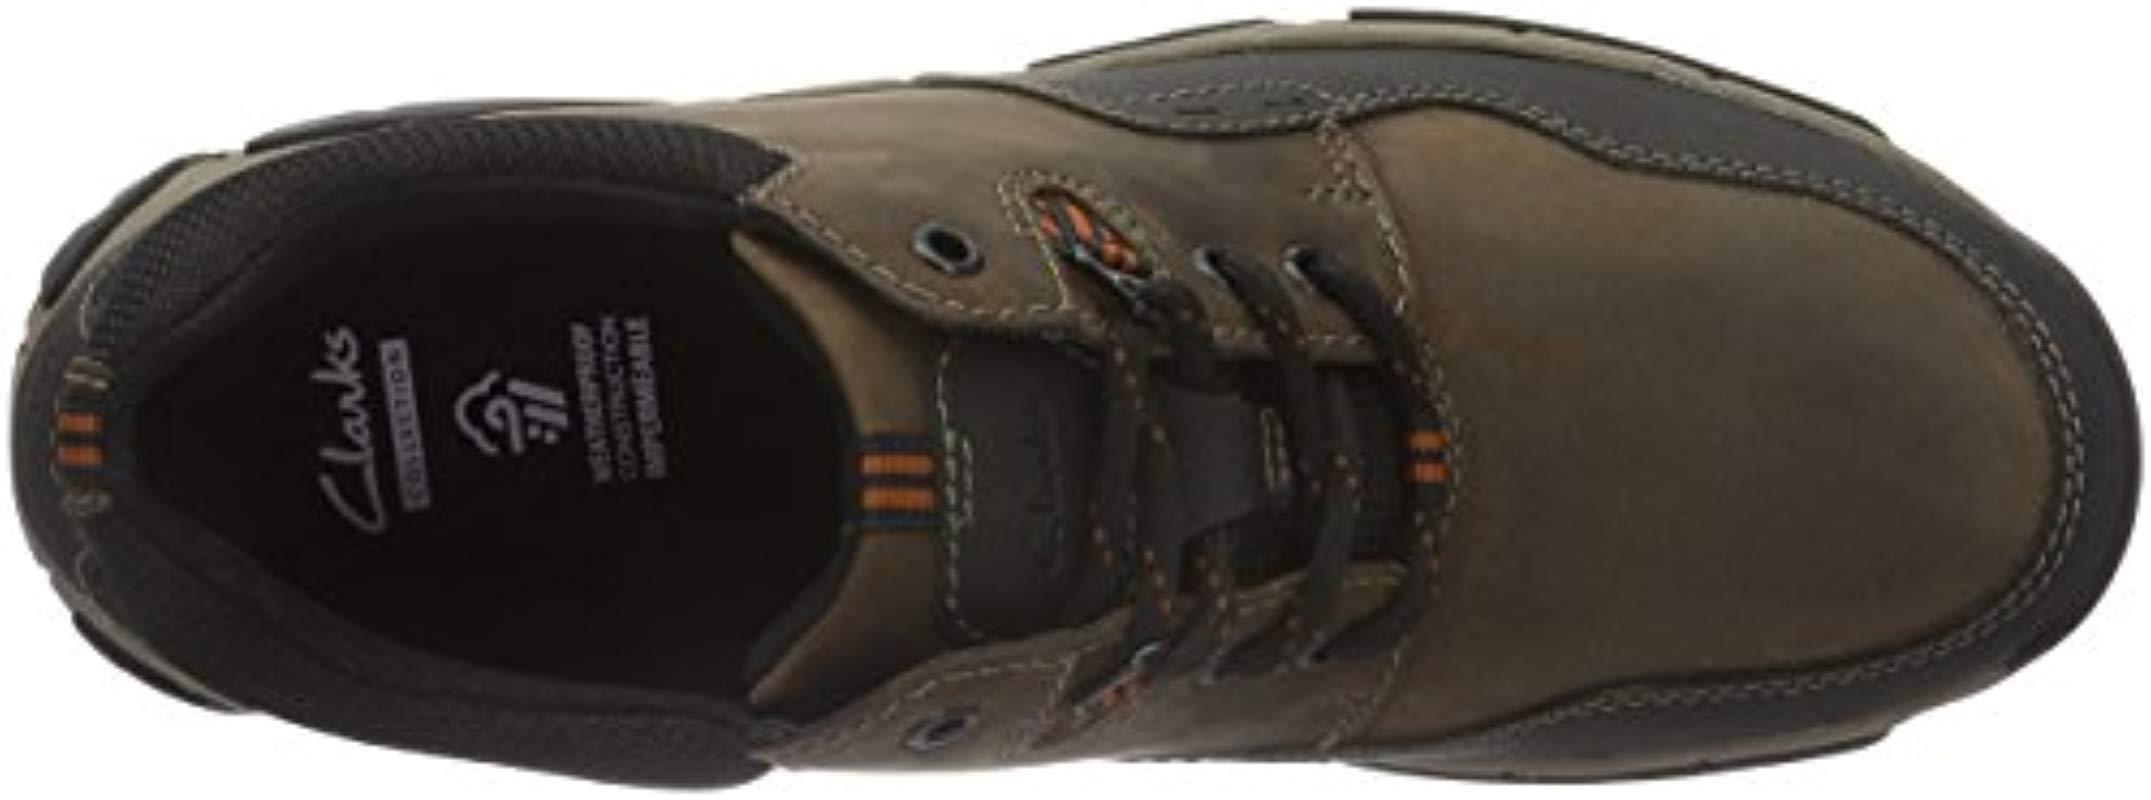 Clarks Leather 's Walbeck Edge Sneakers in Brown Brown Leather (Brown) for  Men - Save 35% | Lyst UK